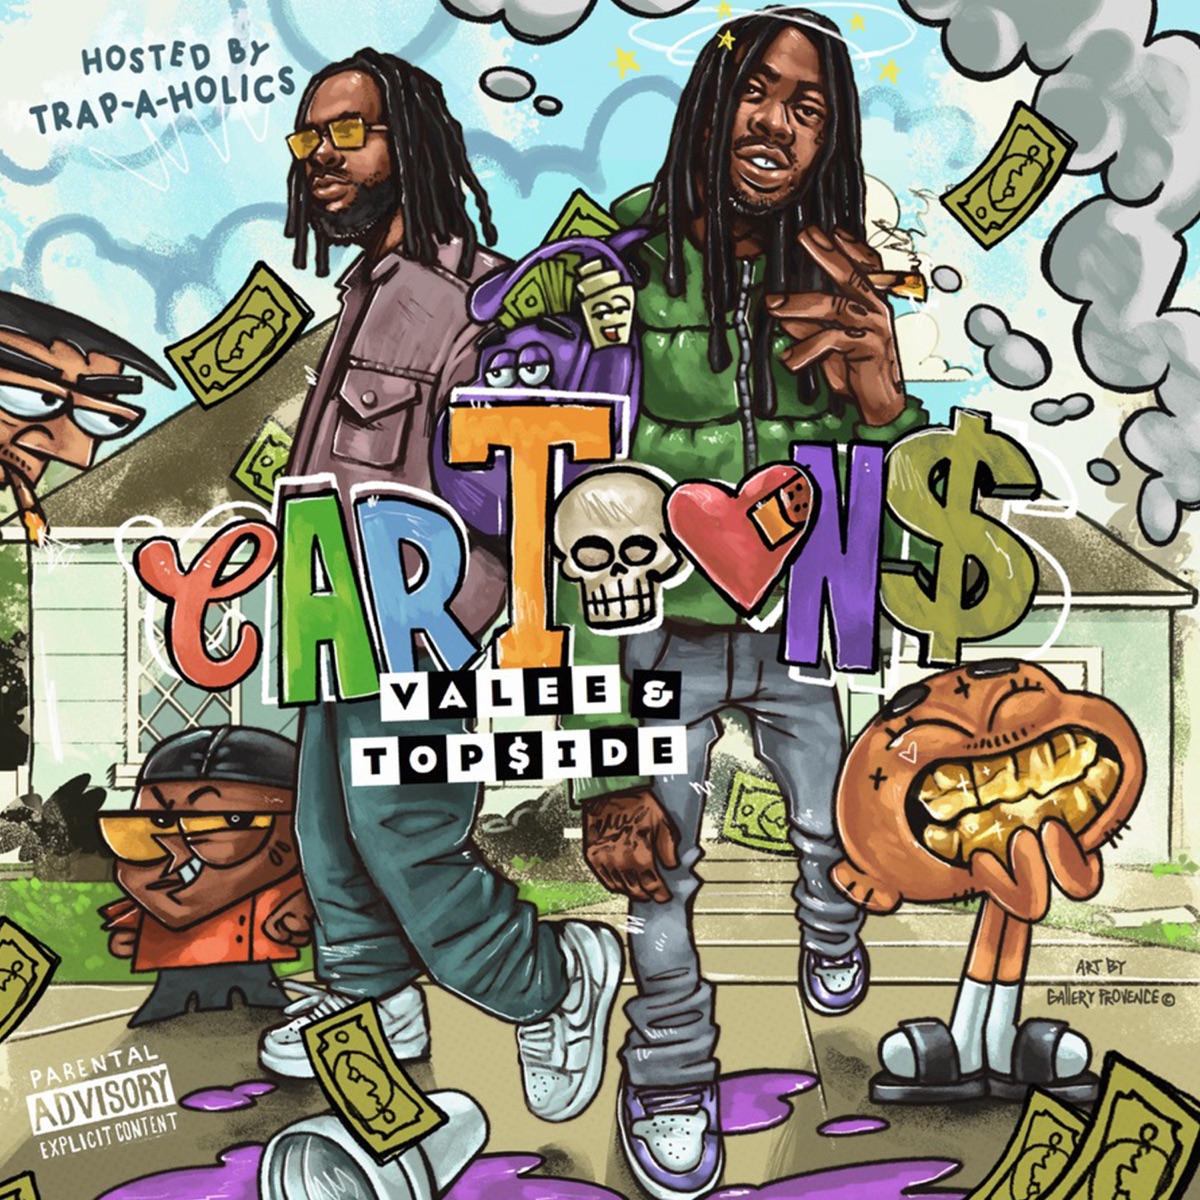 Valee, Top$ide & Trap-A-Holics – Hol’ On